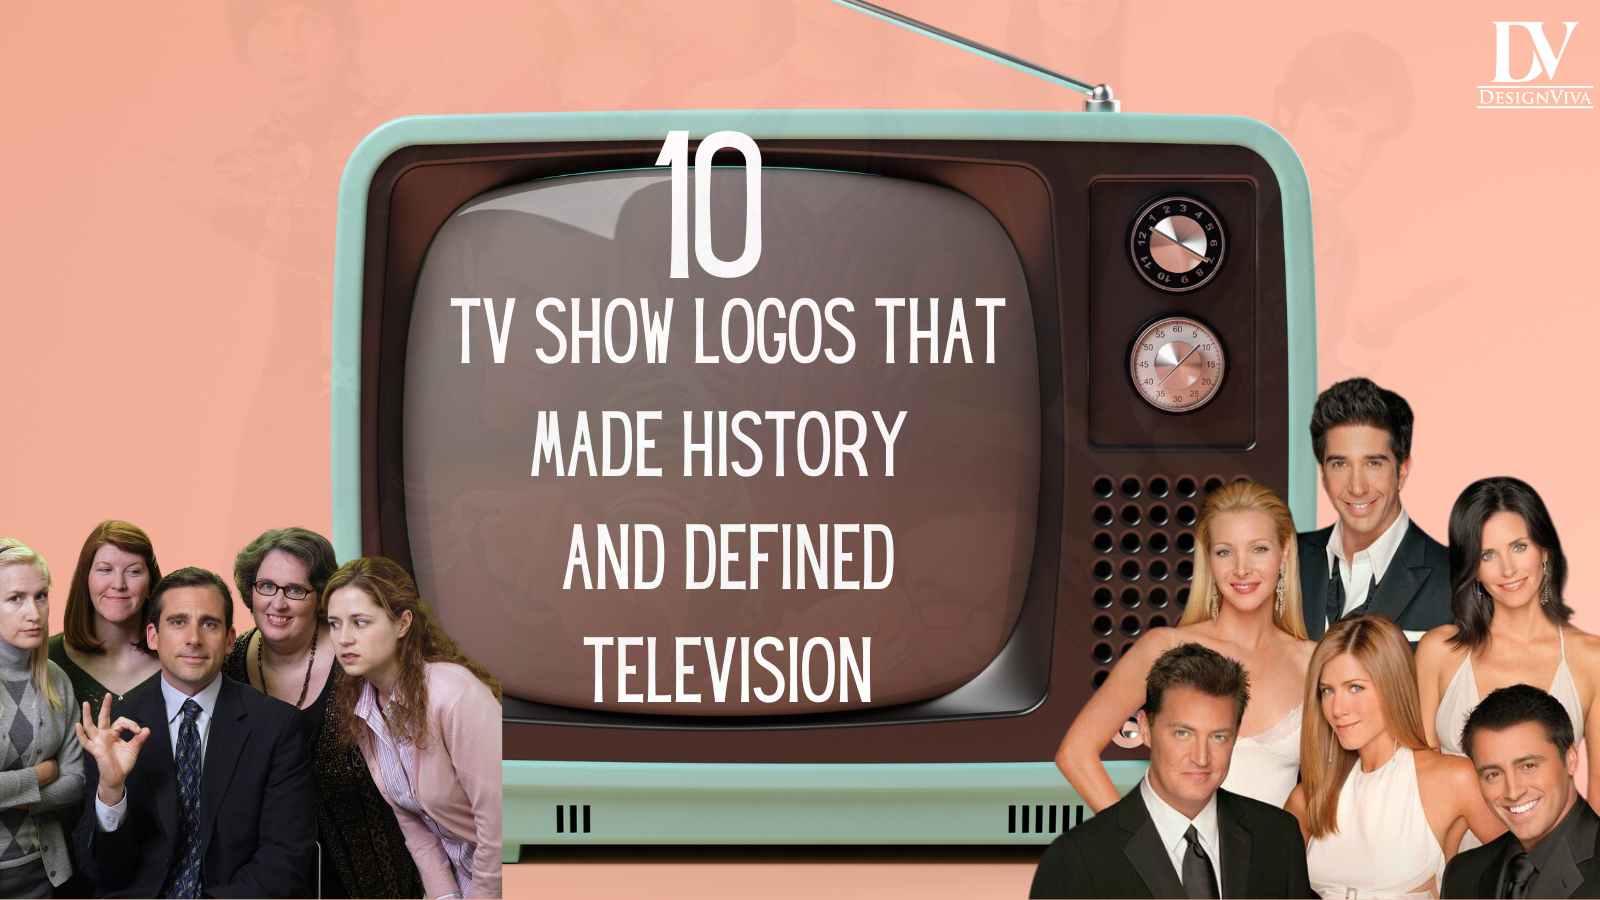 10 TV Show Logos That Made History and Defined Television | Design Blog